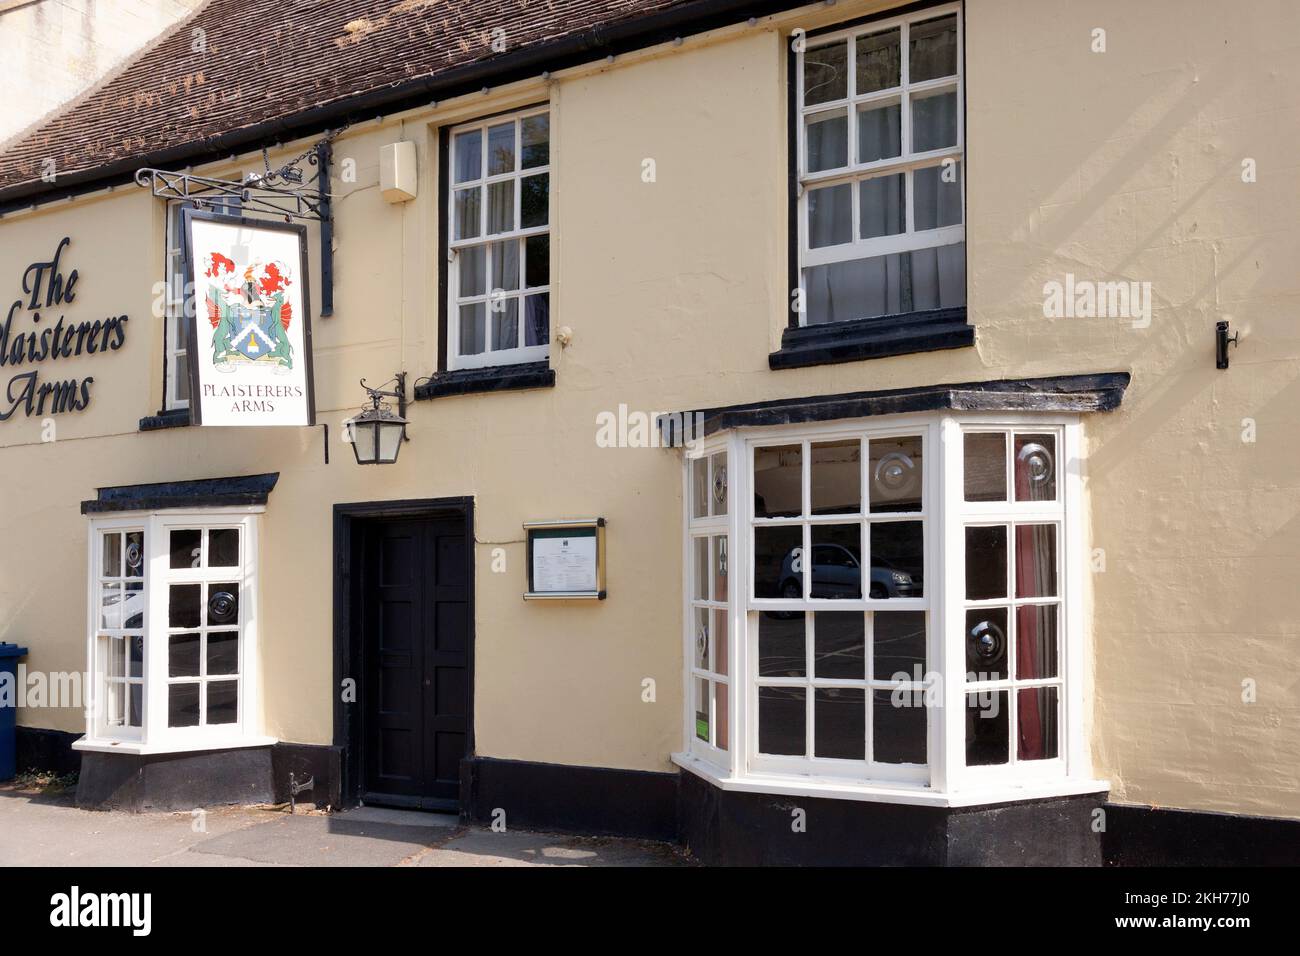 The Plaisterers Arms, Winchcombe, Glouchestershire Foto Stock